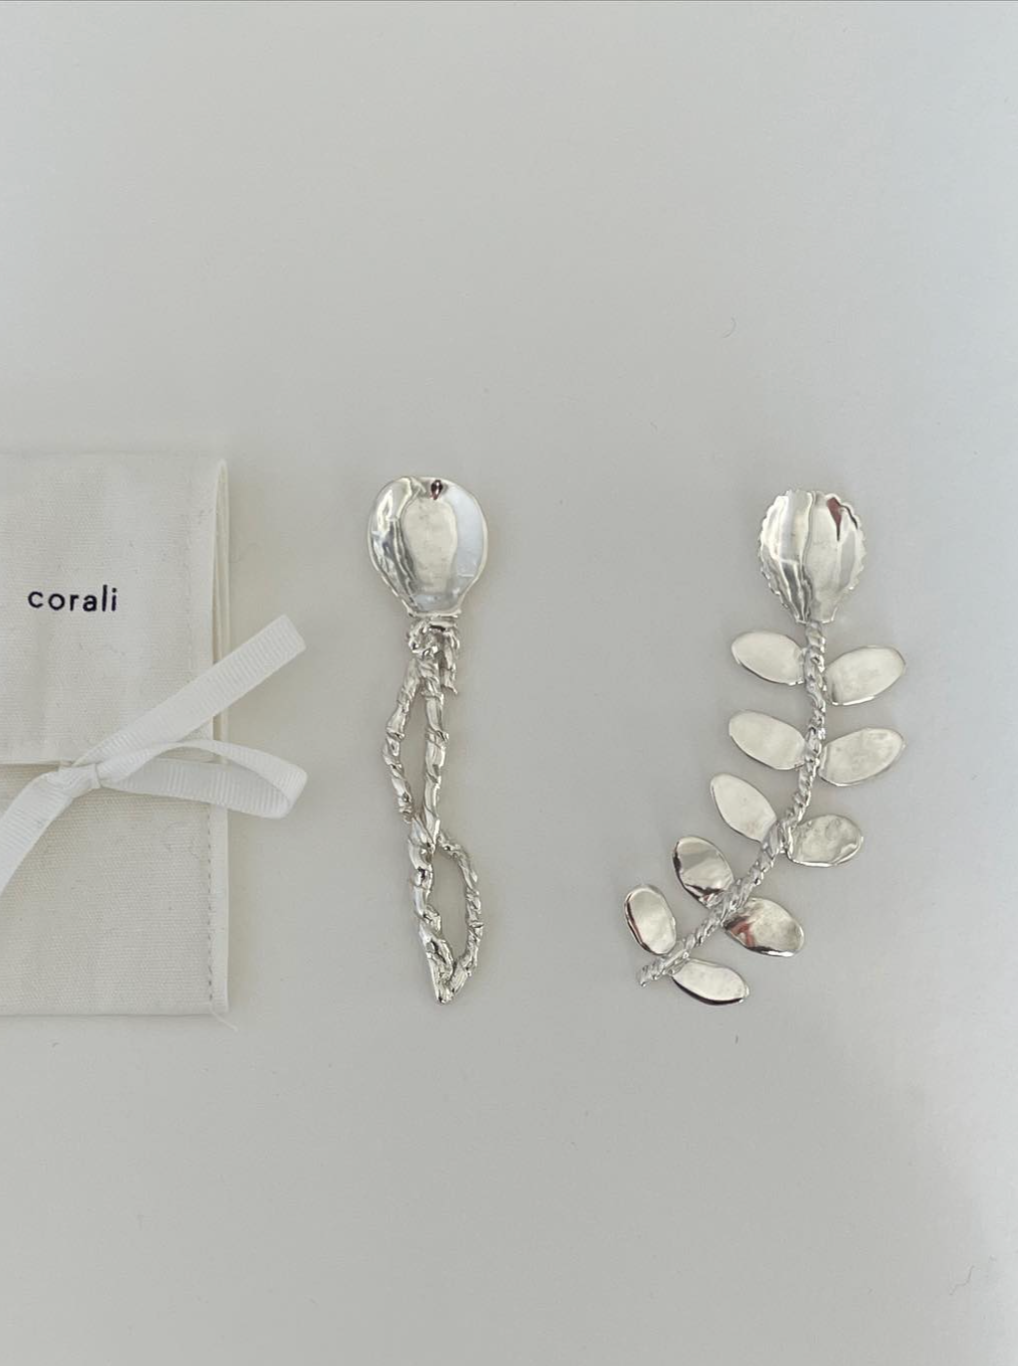 Two handcrafted silver hairpins with floral and leaf designs, displayed next to a small white pouch labeled "Babette Compote Spoon Sterling Silver" on a simple gray background from the Corali brand.